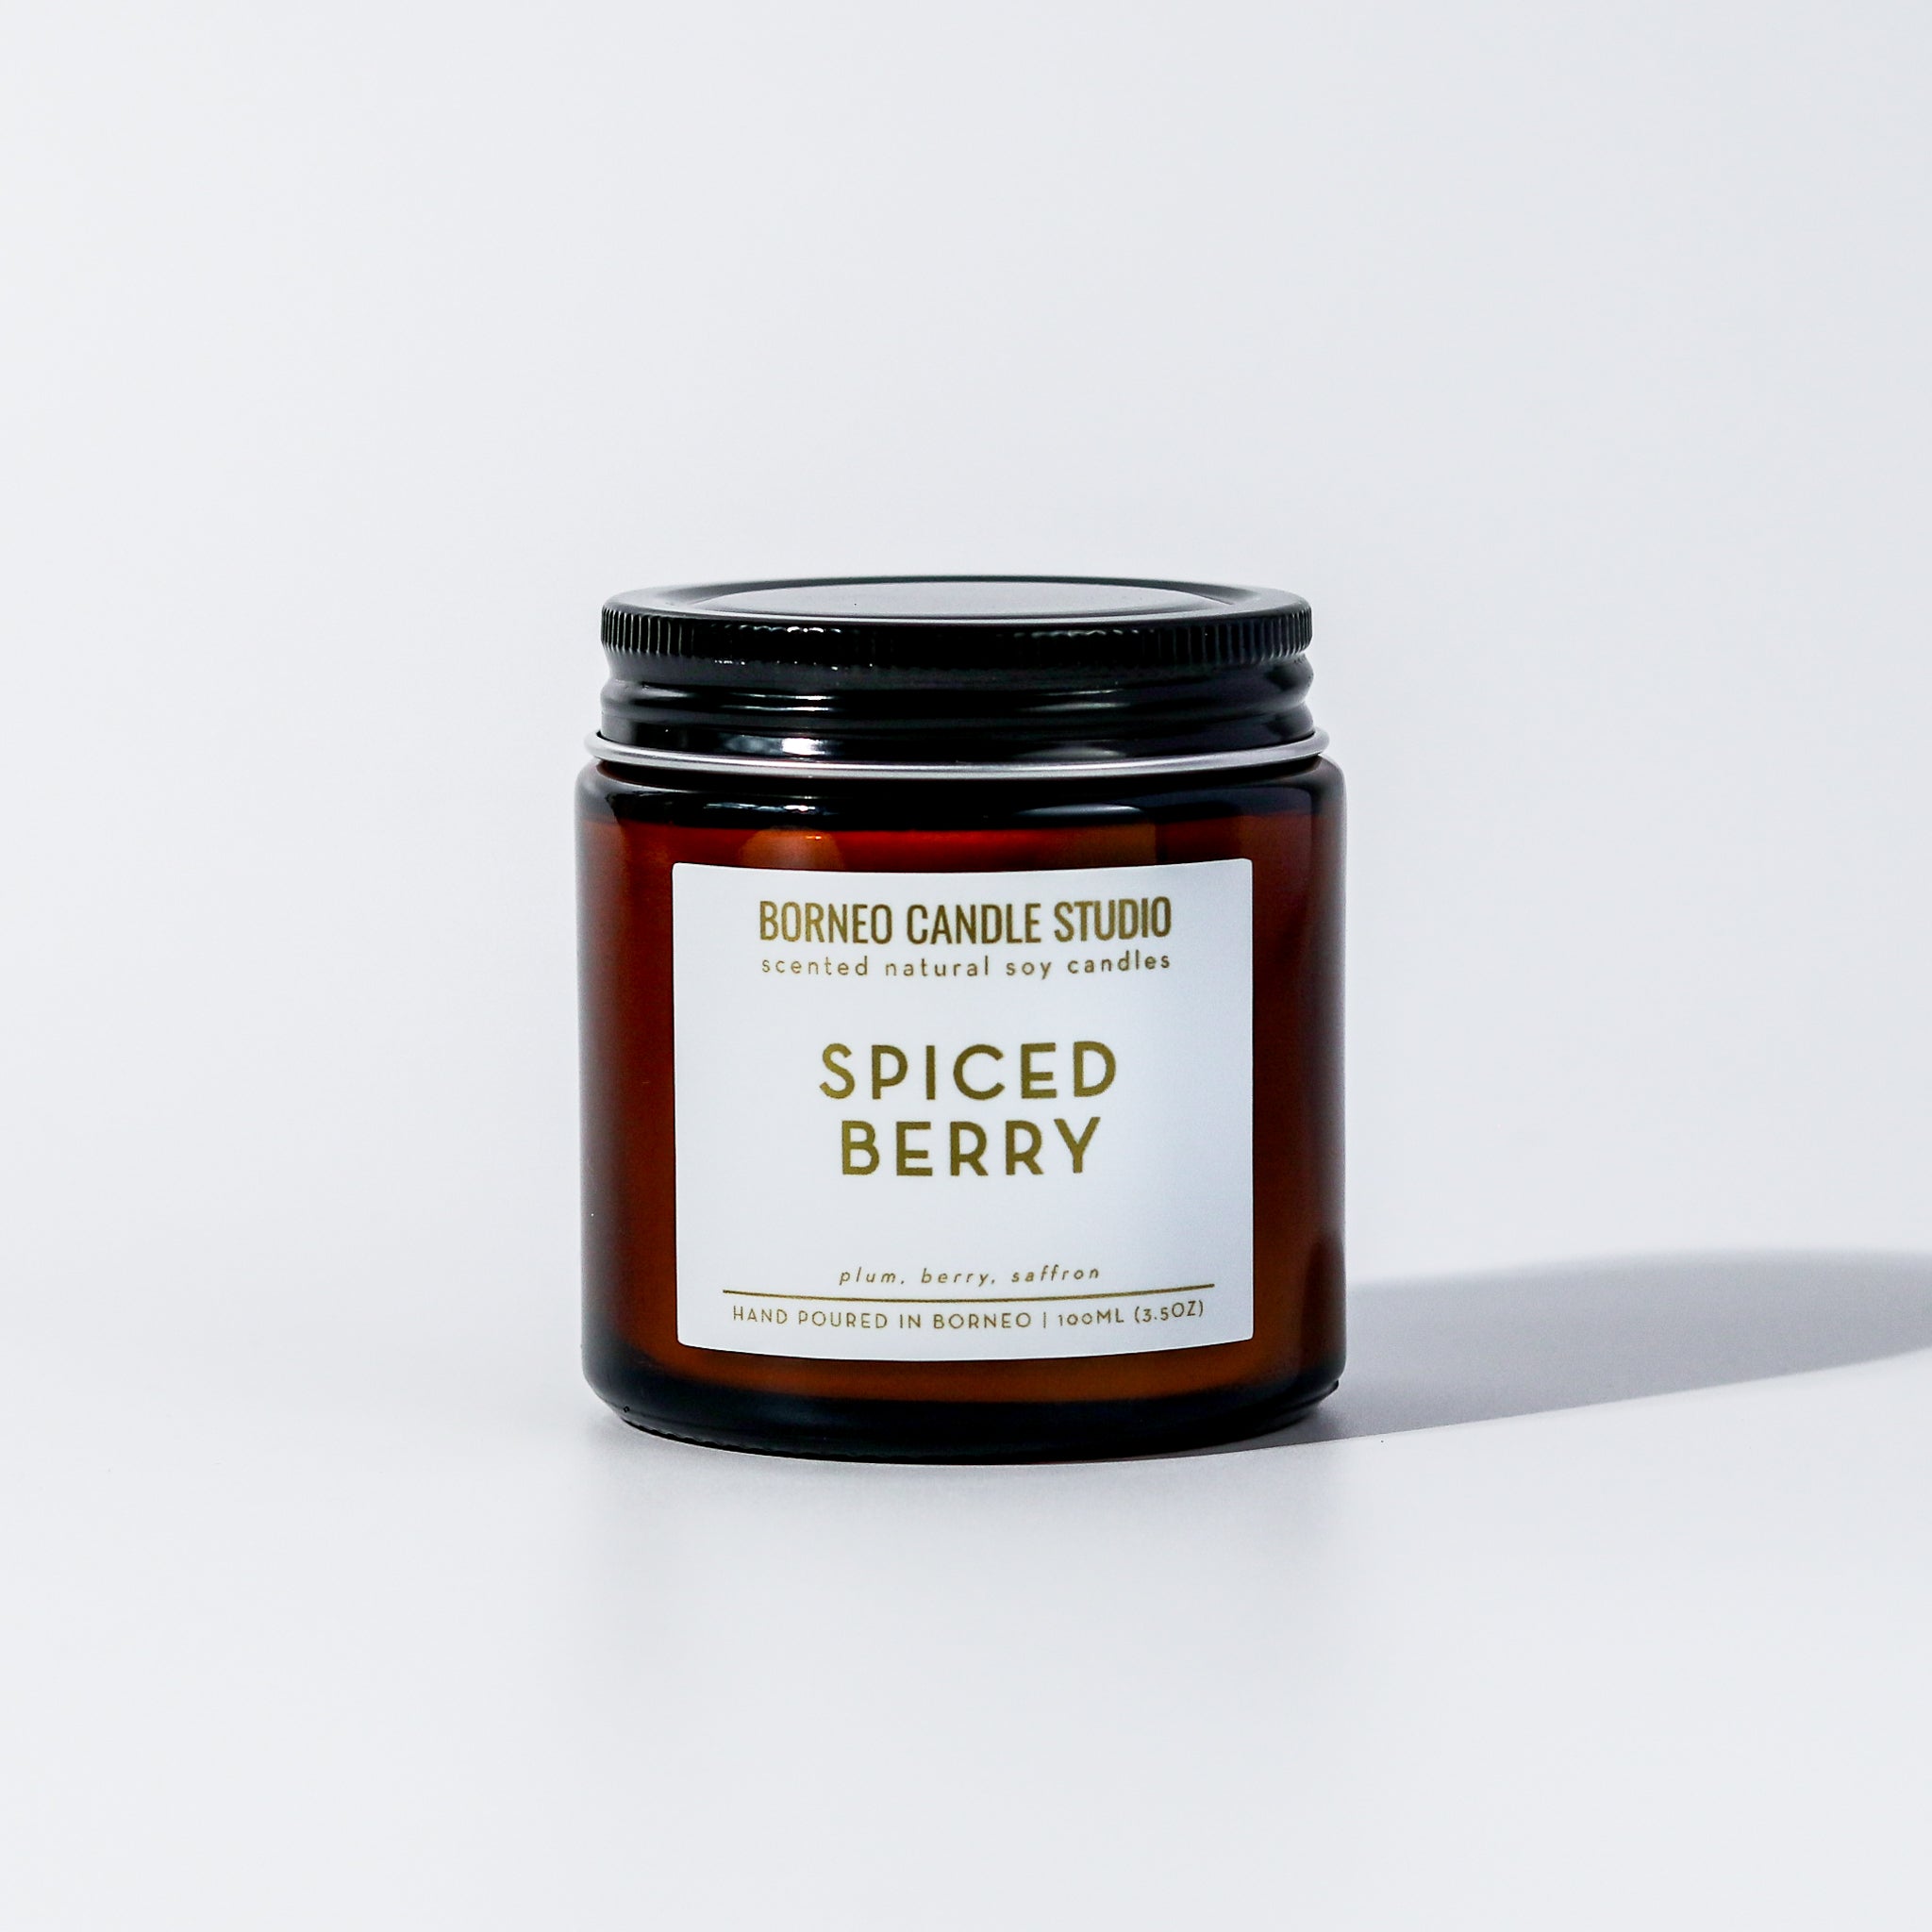 Spiced Berry Holiday Christmas Scented Candle Borneo Candle Studio with notes of plum, berries and saffron